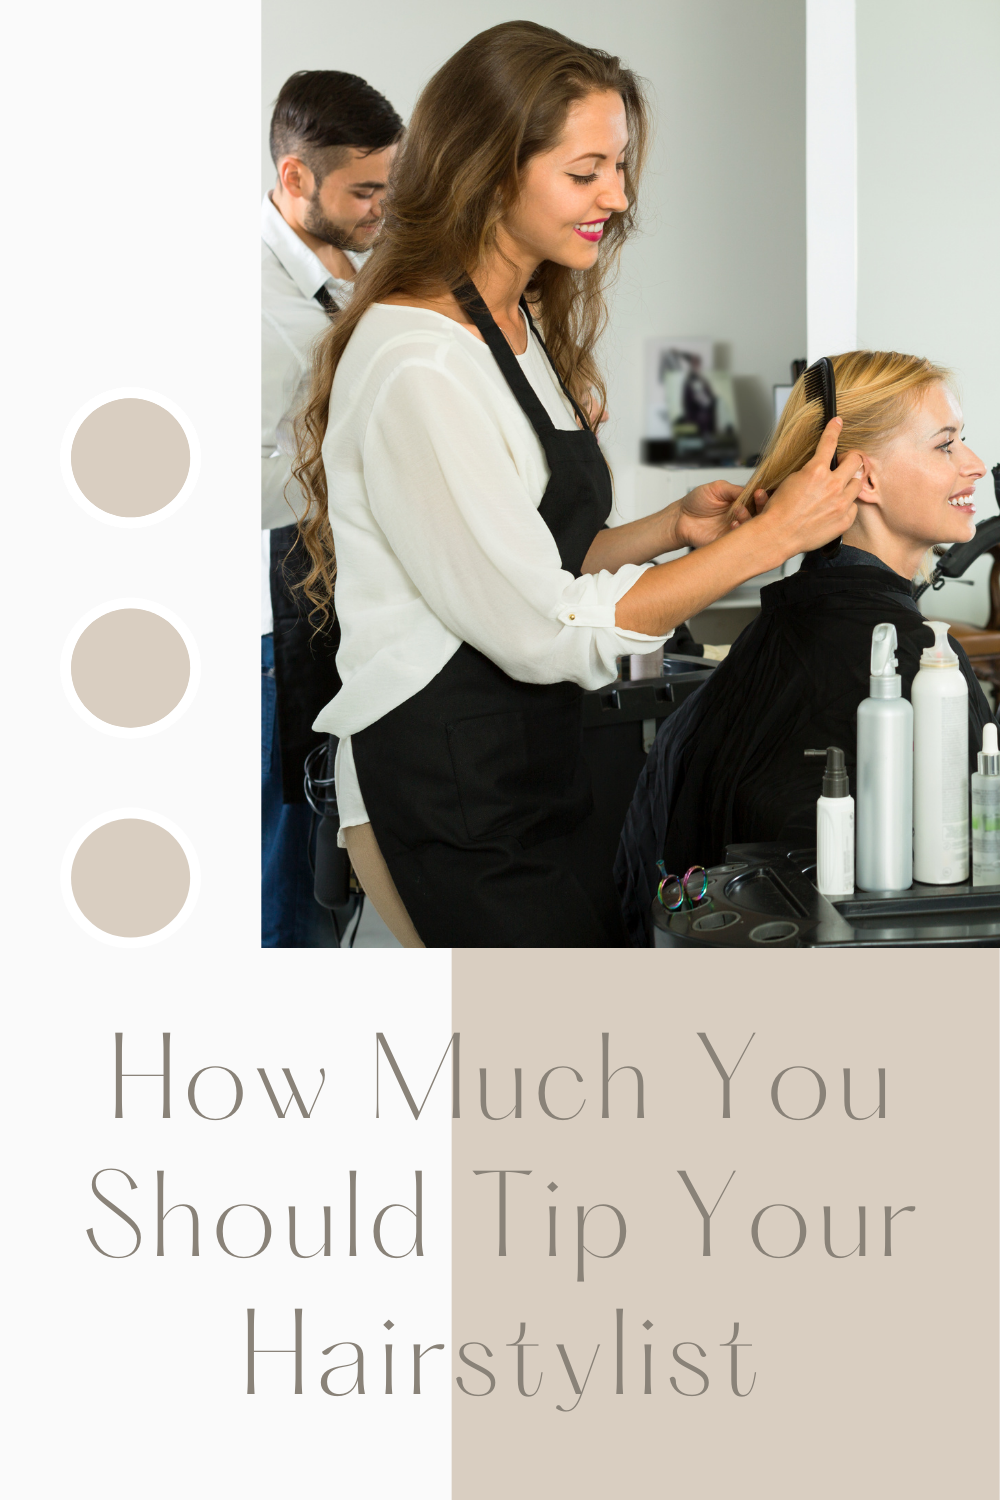 How Much You Should Tip Your Hairstylist